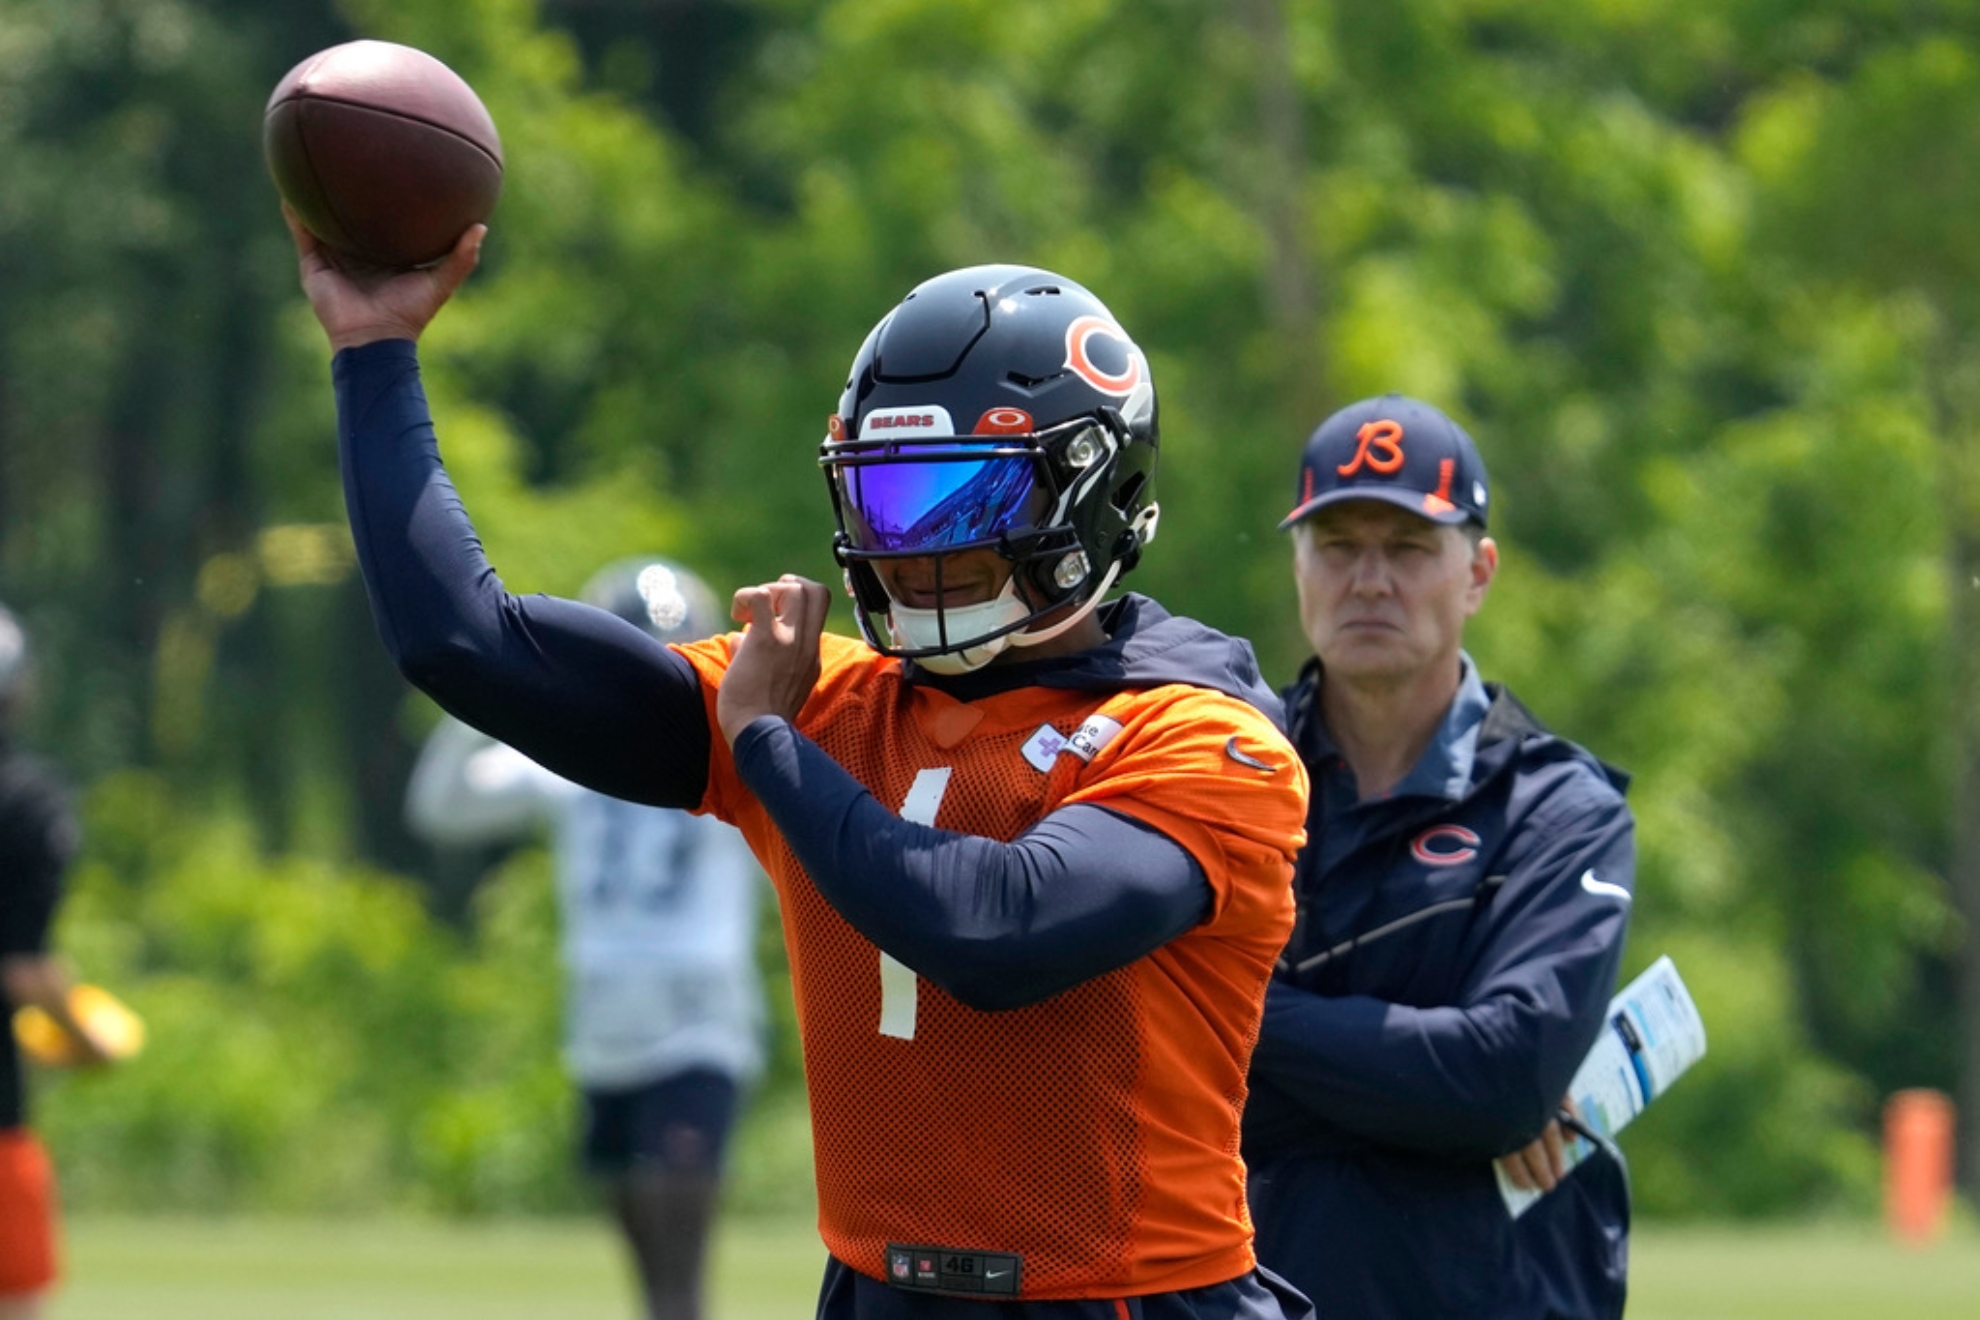 Fields has been the subject of criticism in the Bears offense